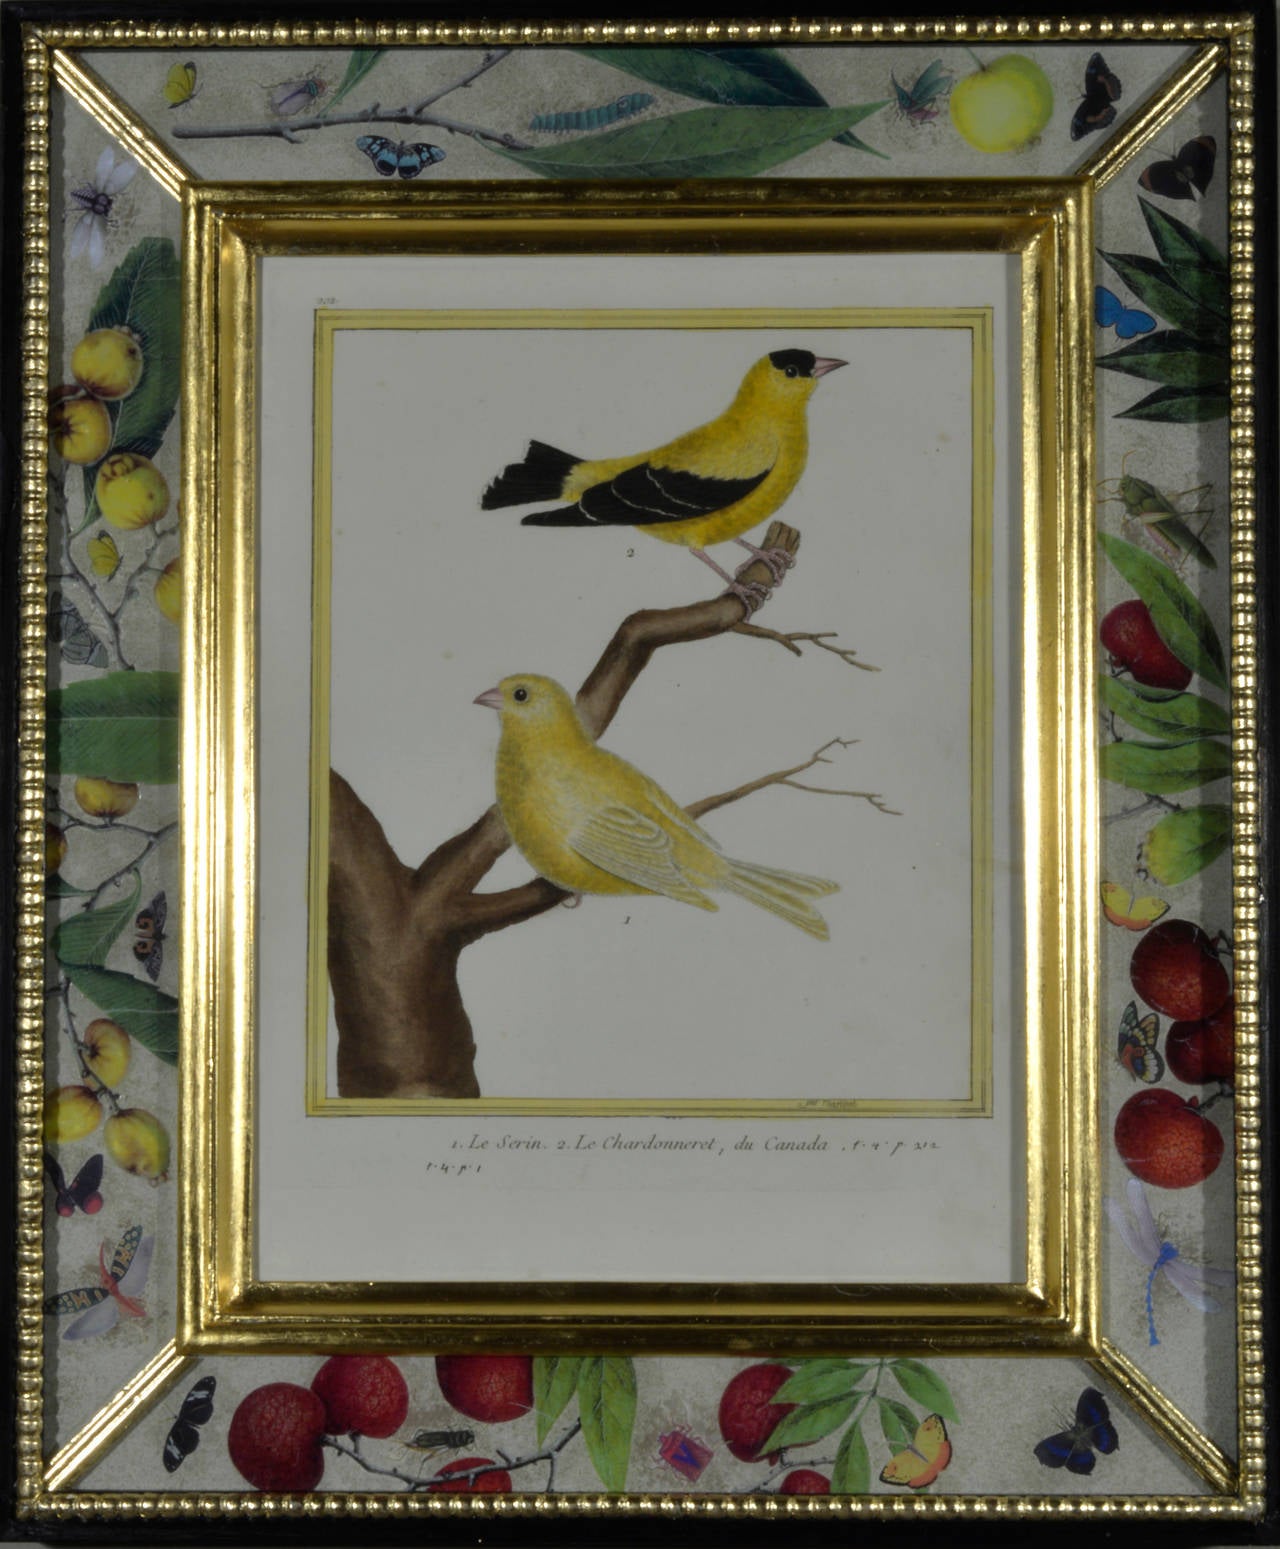 Histoire Naturelle Des Oiseaux.

The engravings set in an églomisé and decoupage glass bordered frame.

Reference: 
Series of bird prints from the most important and comprehensive late 18th century French ornithological color-plate set. The set